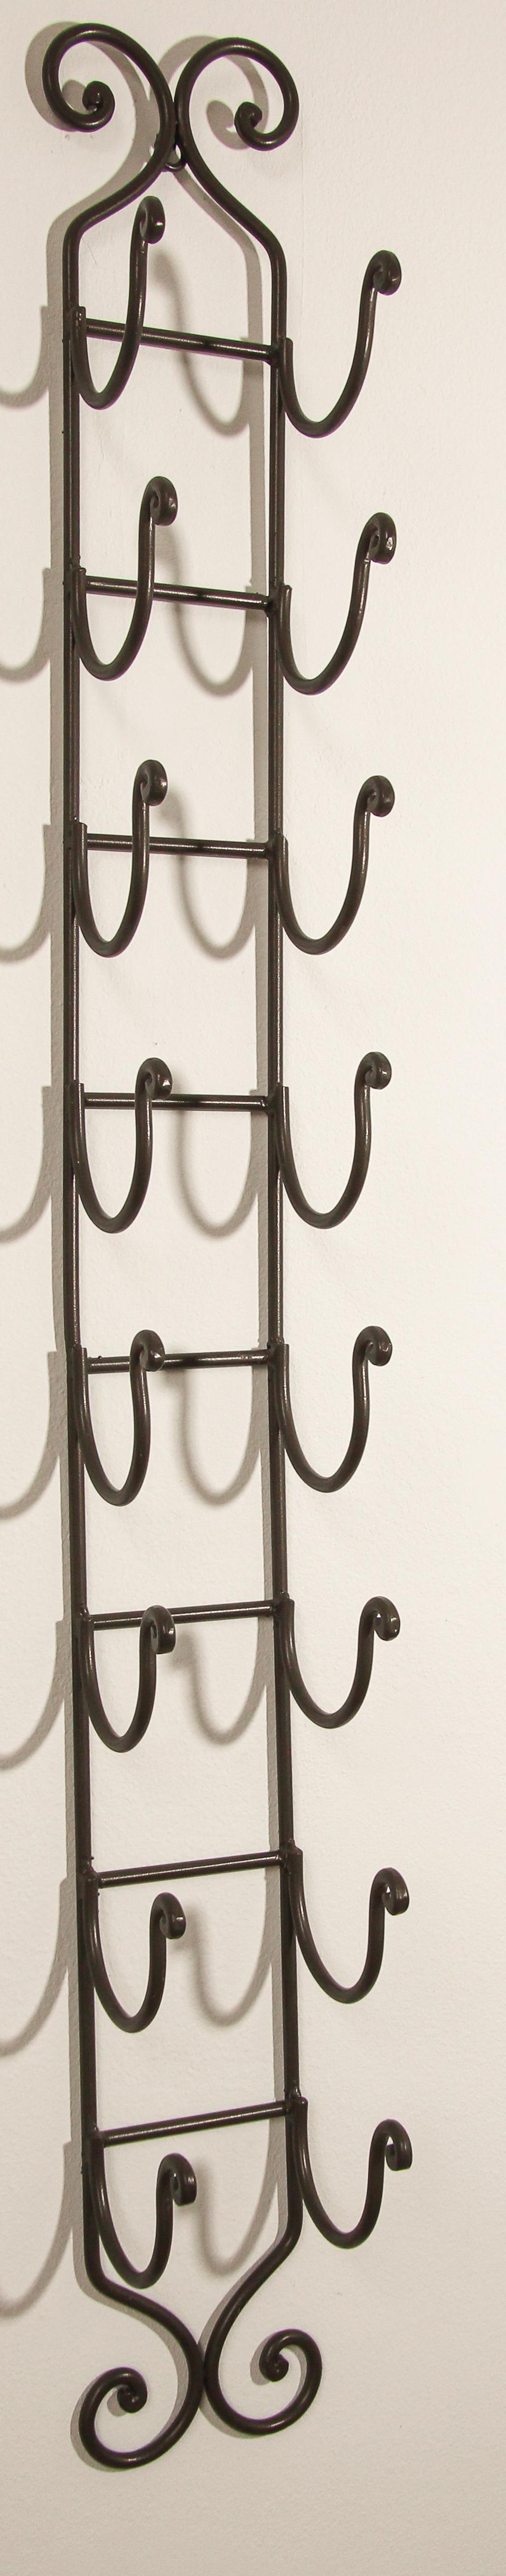 wrought iron wine rack for wall